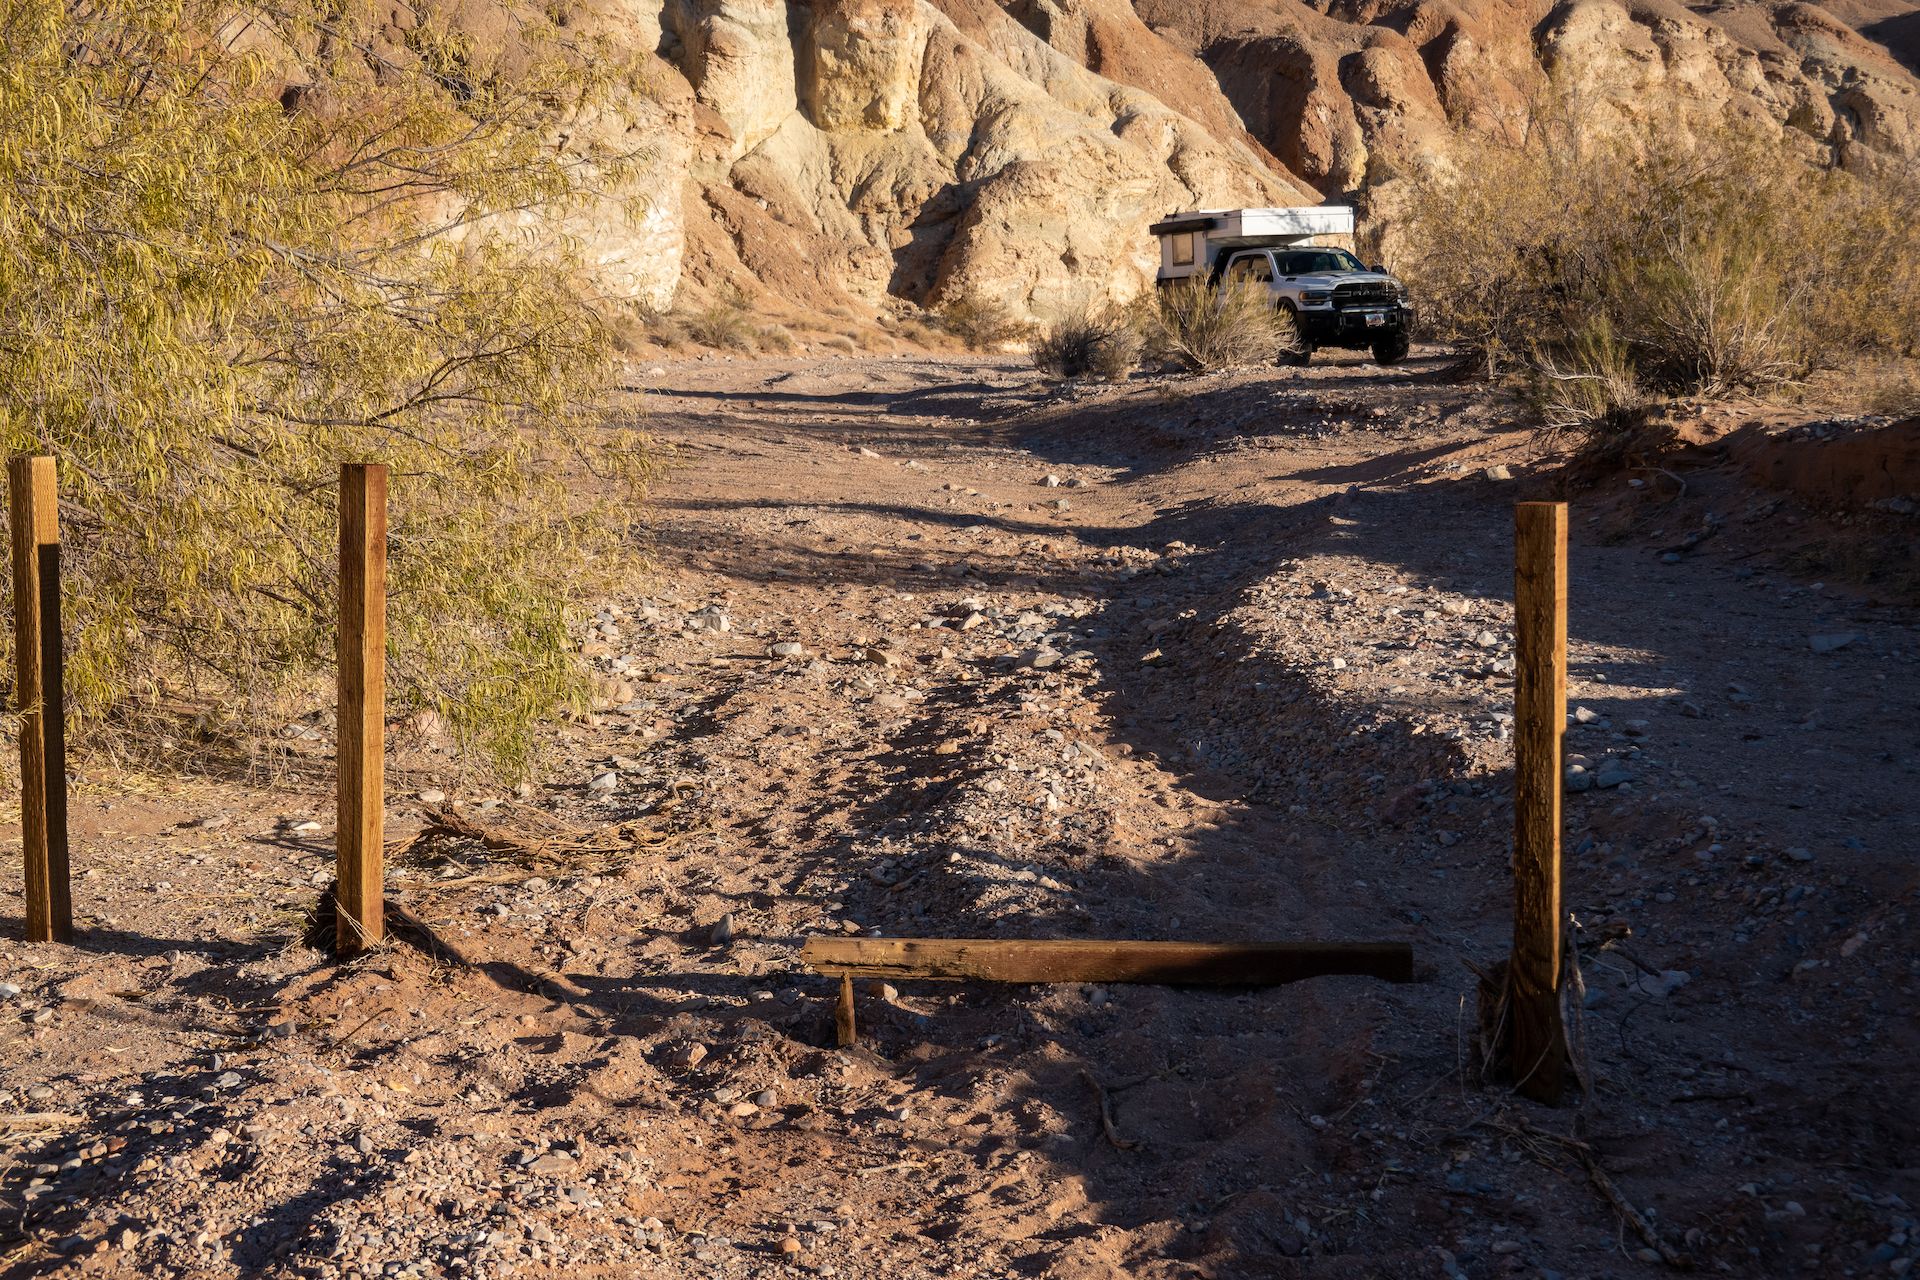 I parked on the wash just before the Red Bluff Springs. This is a very sensible environment, and the BLM blocked the access to the wash but stupid OHV users don’t care. They break the fence and drive to the springs anyway…